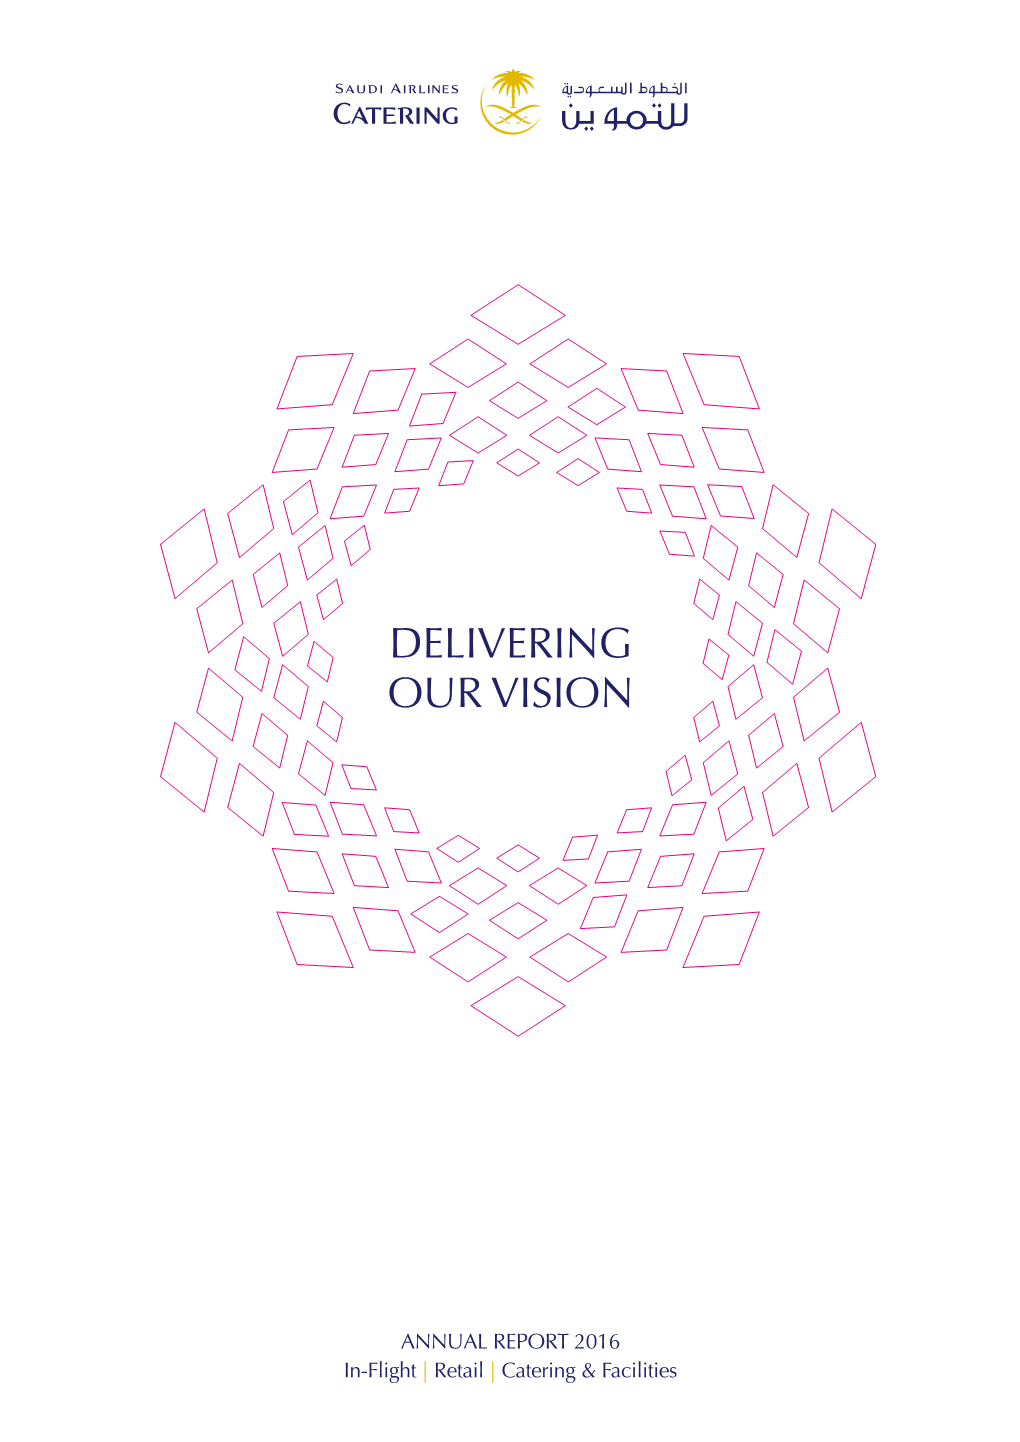 DELIVERING OUR VISION Annual 2016 Report